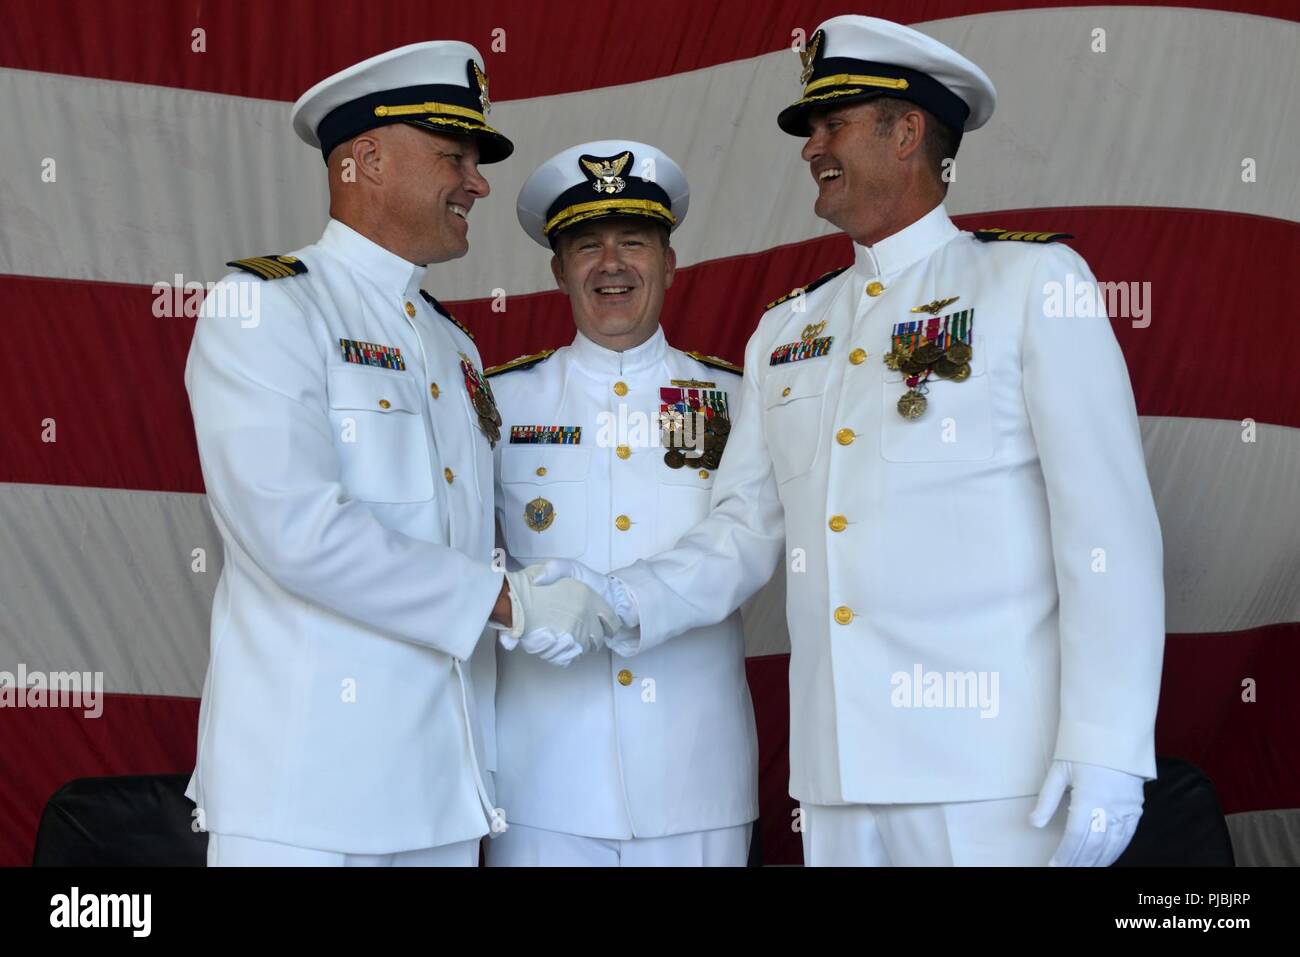 Capt. Andrew W. Eriks (left) shakes hands with Capt. Frederick C. Riedlin (right) while Rear Adm. Brian Penoyer (center) looks on at a change of command ceremony at Air Station Barbers Point, July 6, 2018. Coast Guard aviation has been present at Barbers Point since 1949 and officially designated as Coast Guard Air Station Barbers Point in 1965. Stock Photo